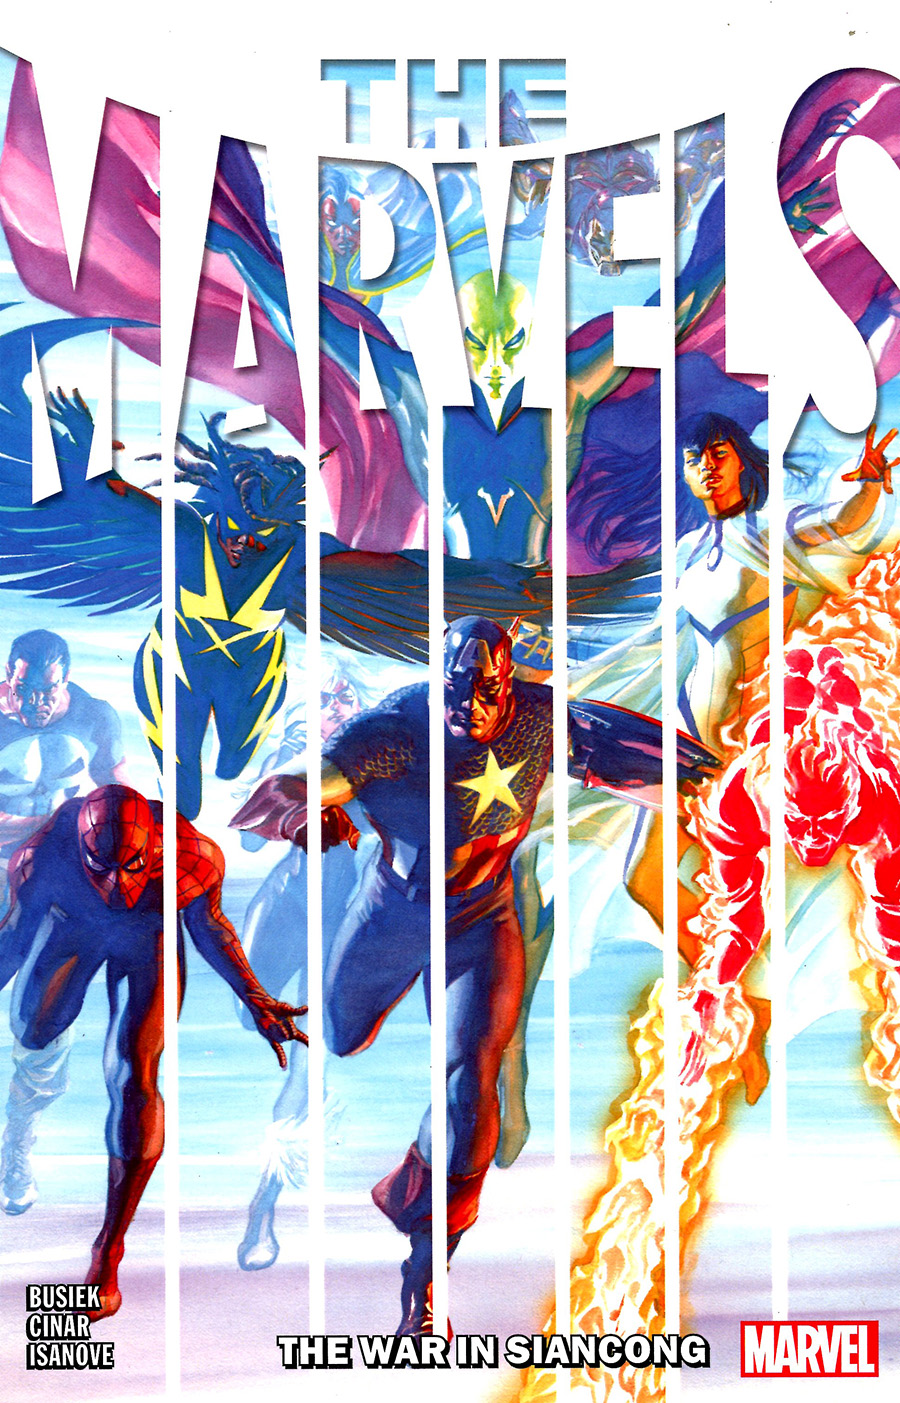 The Marvels Vol 1 War In Siancong TP